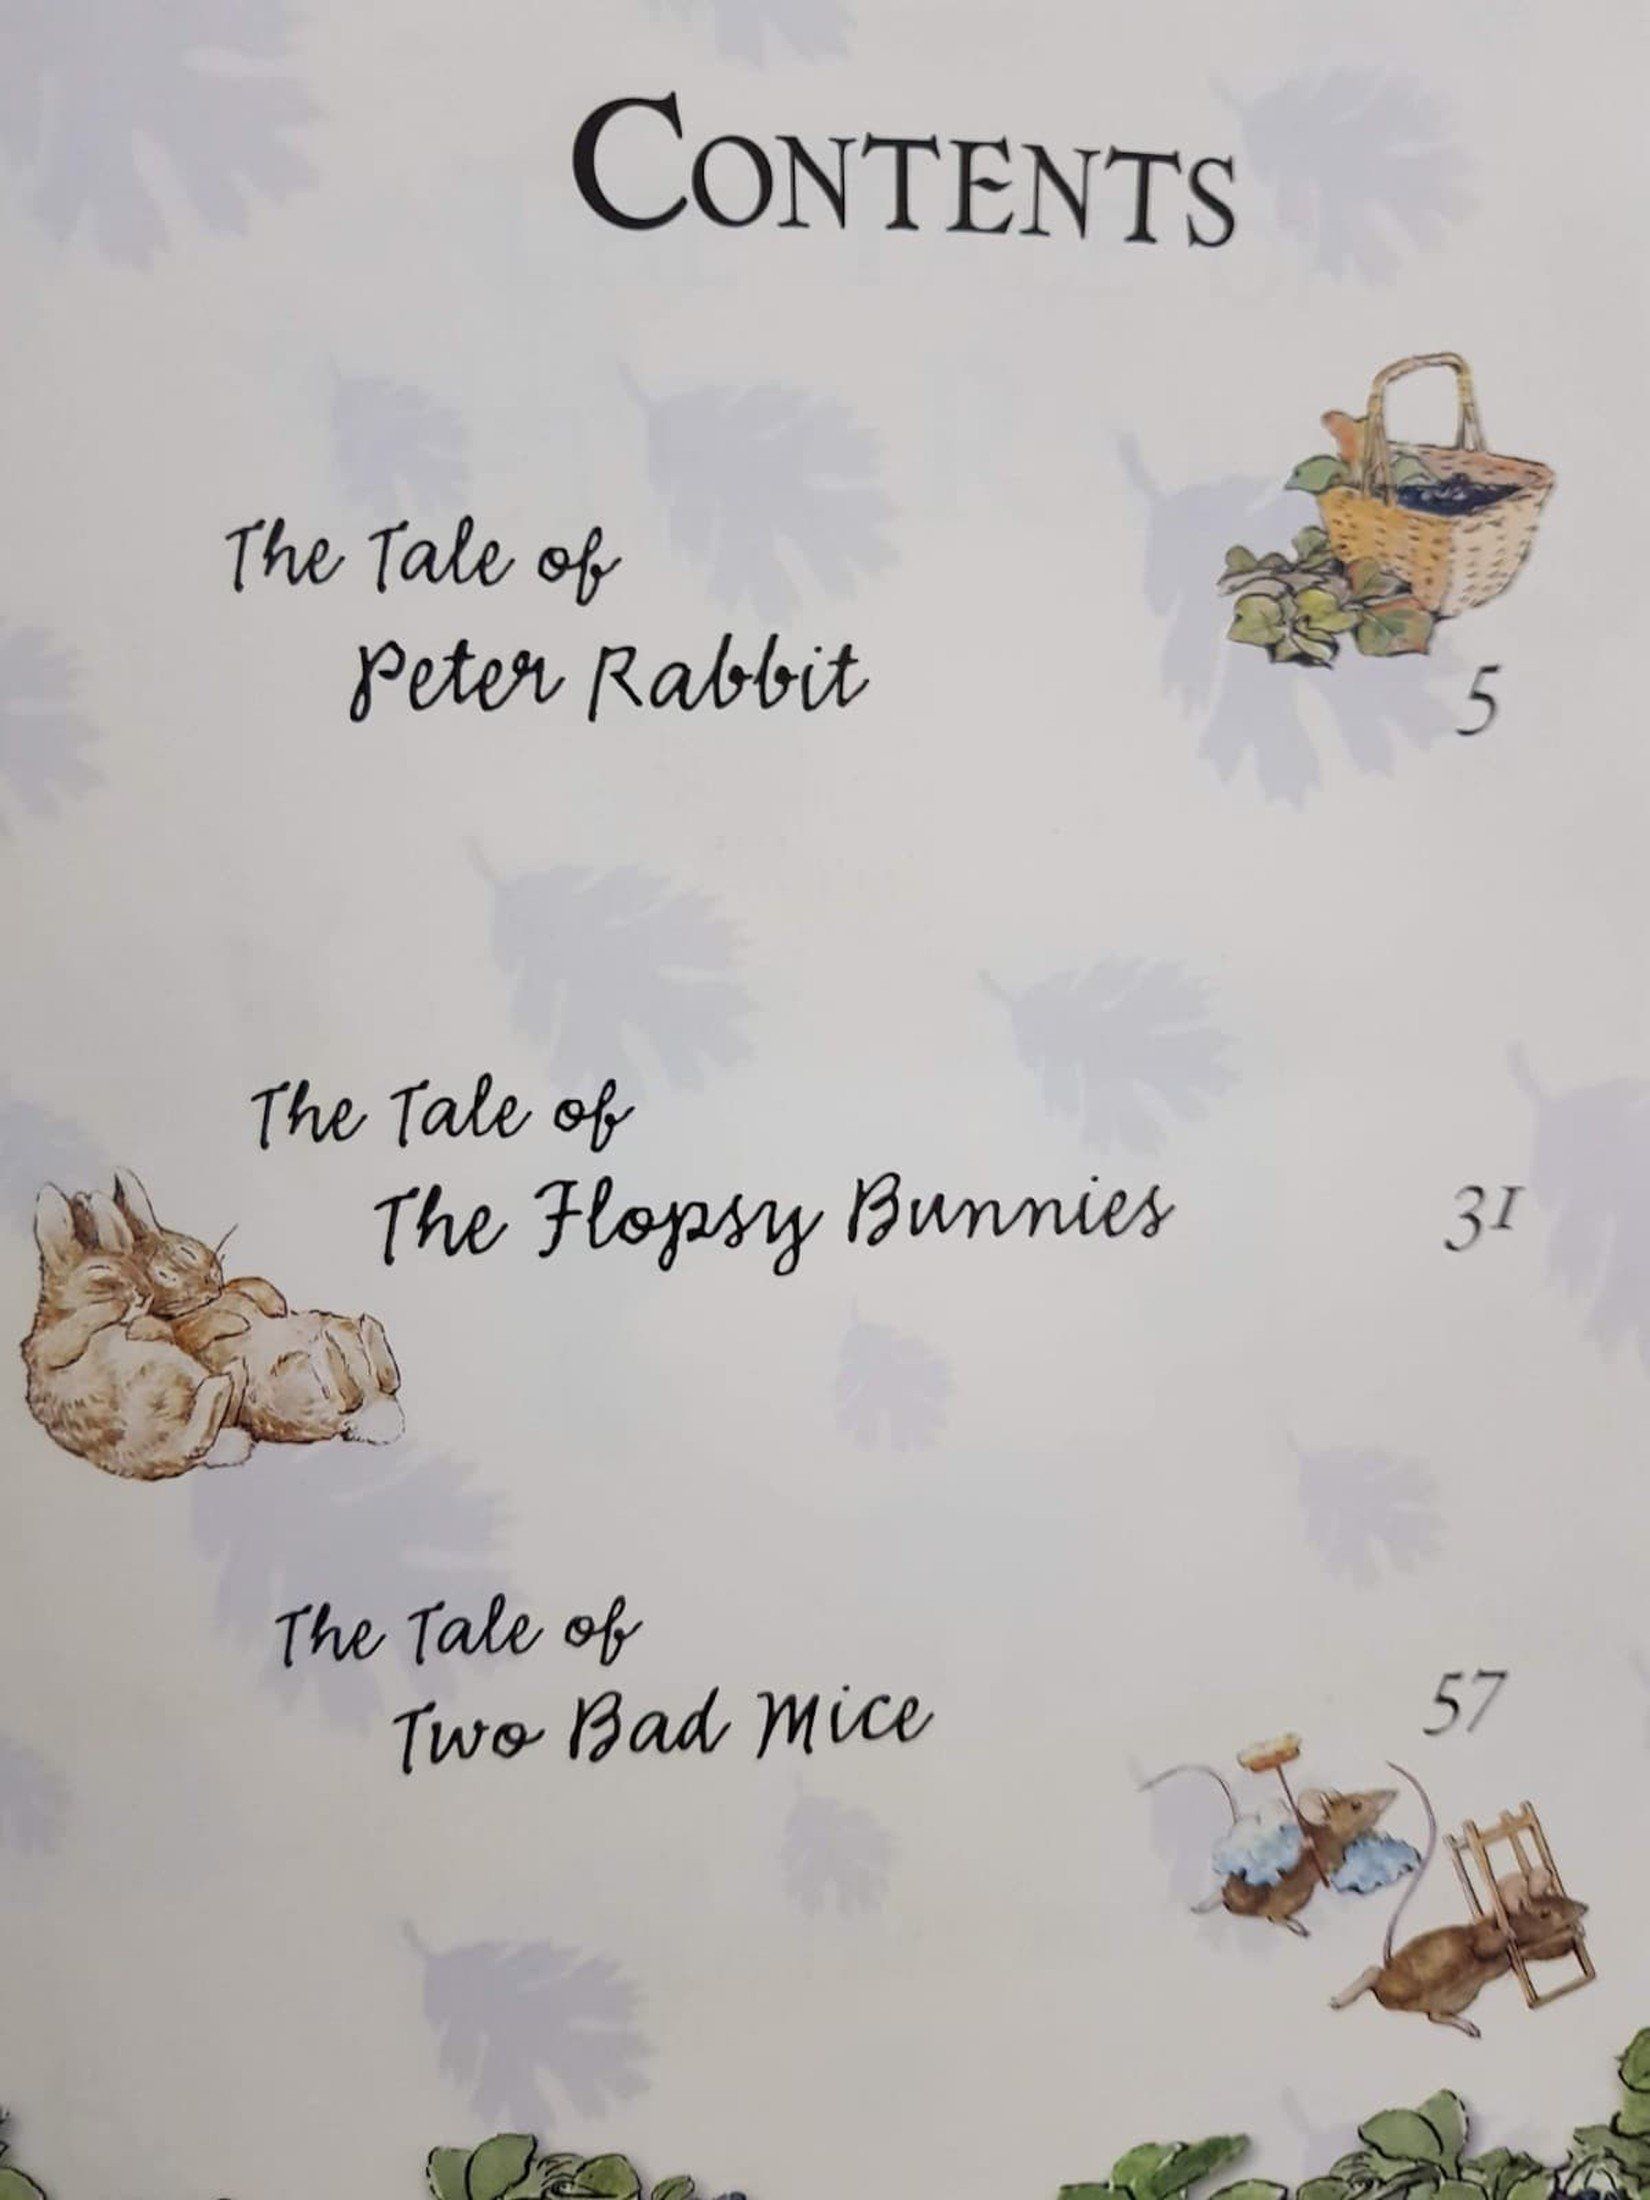 PETER RABBIT AND FRIENDS Bedtime Stories Very Good, 3+ Yrs Recuddles.ch  (6706330173625)